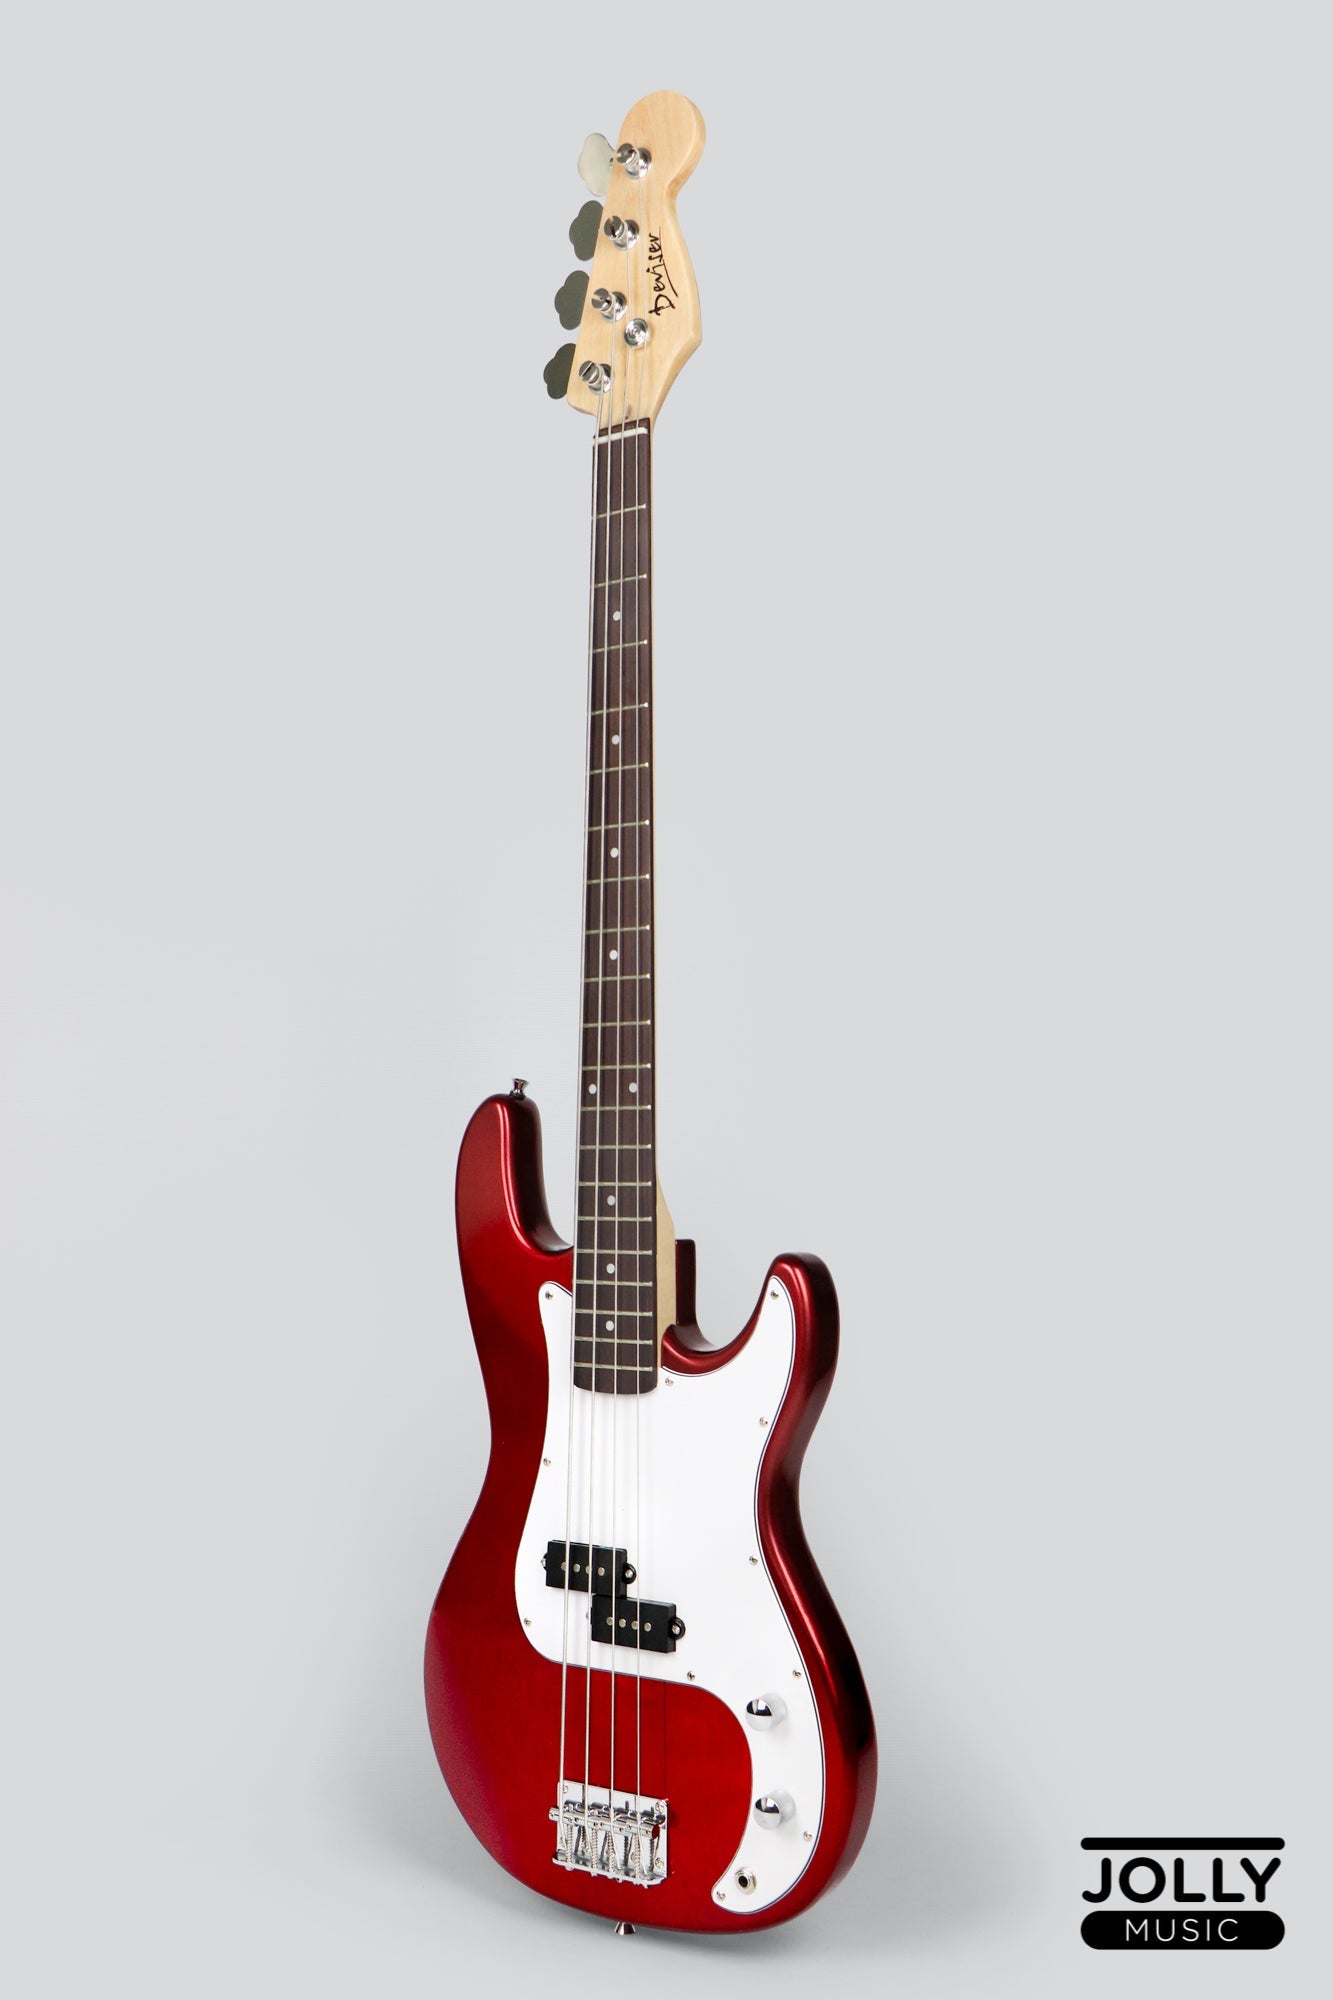 Deviser LB-1 Electric PB Series Guitar (Red) with Cable, Strap, and Gigbag